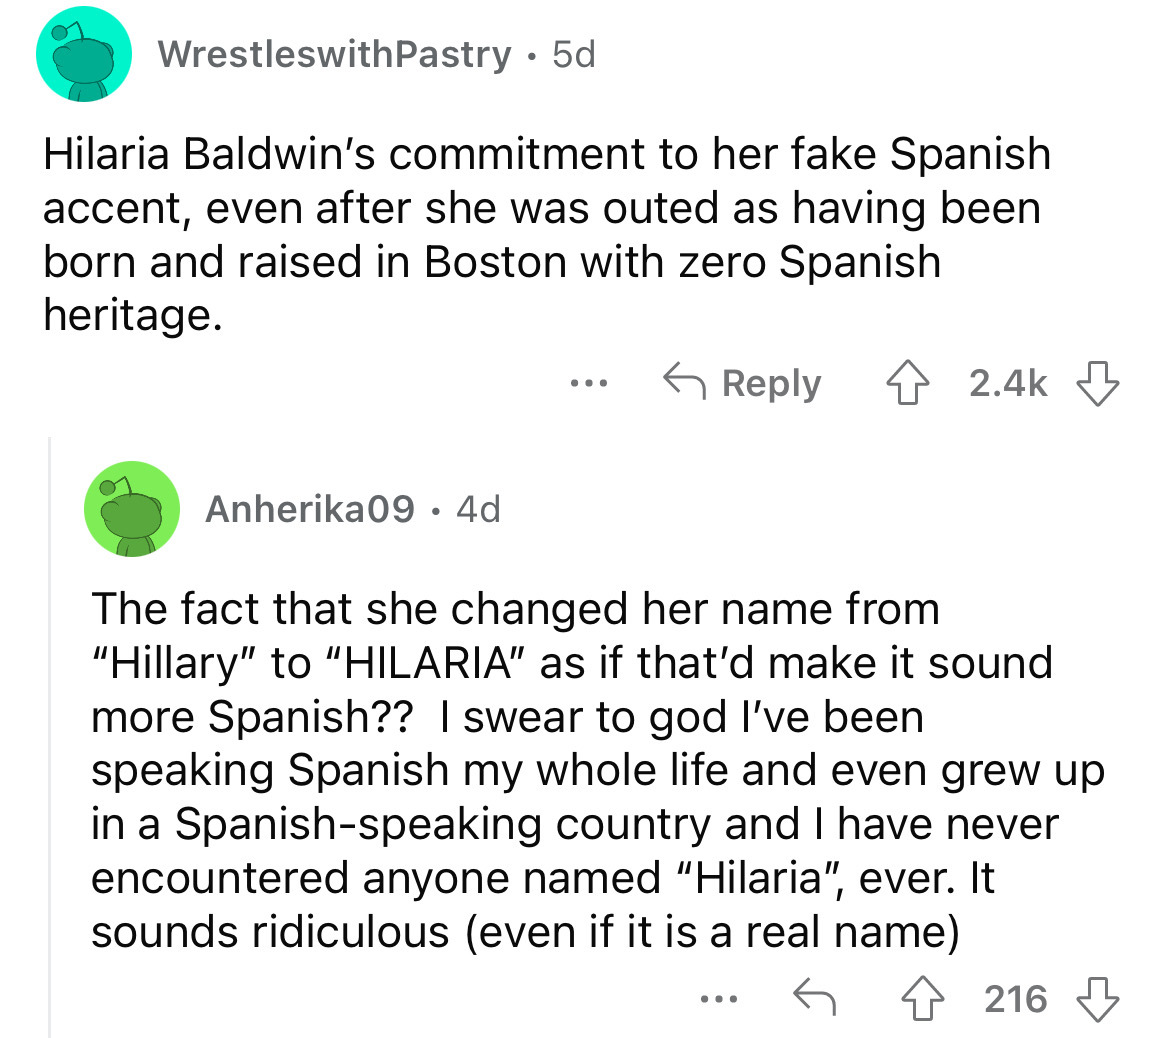 angle - WrestleswithPastry 5d Hilaria Baldwin's commitment to her fake Spanish accent, even after she was outed as having been born and raised in Boston with zero Spanish heritage. Anherika09. 4d ... The fact that she changed her name from "Hillary" to "H